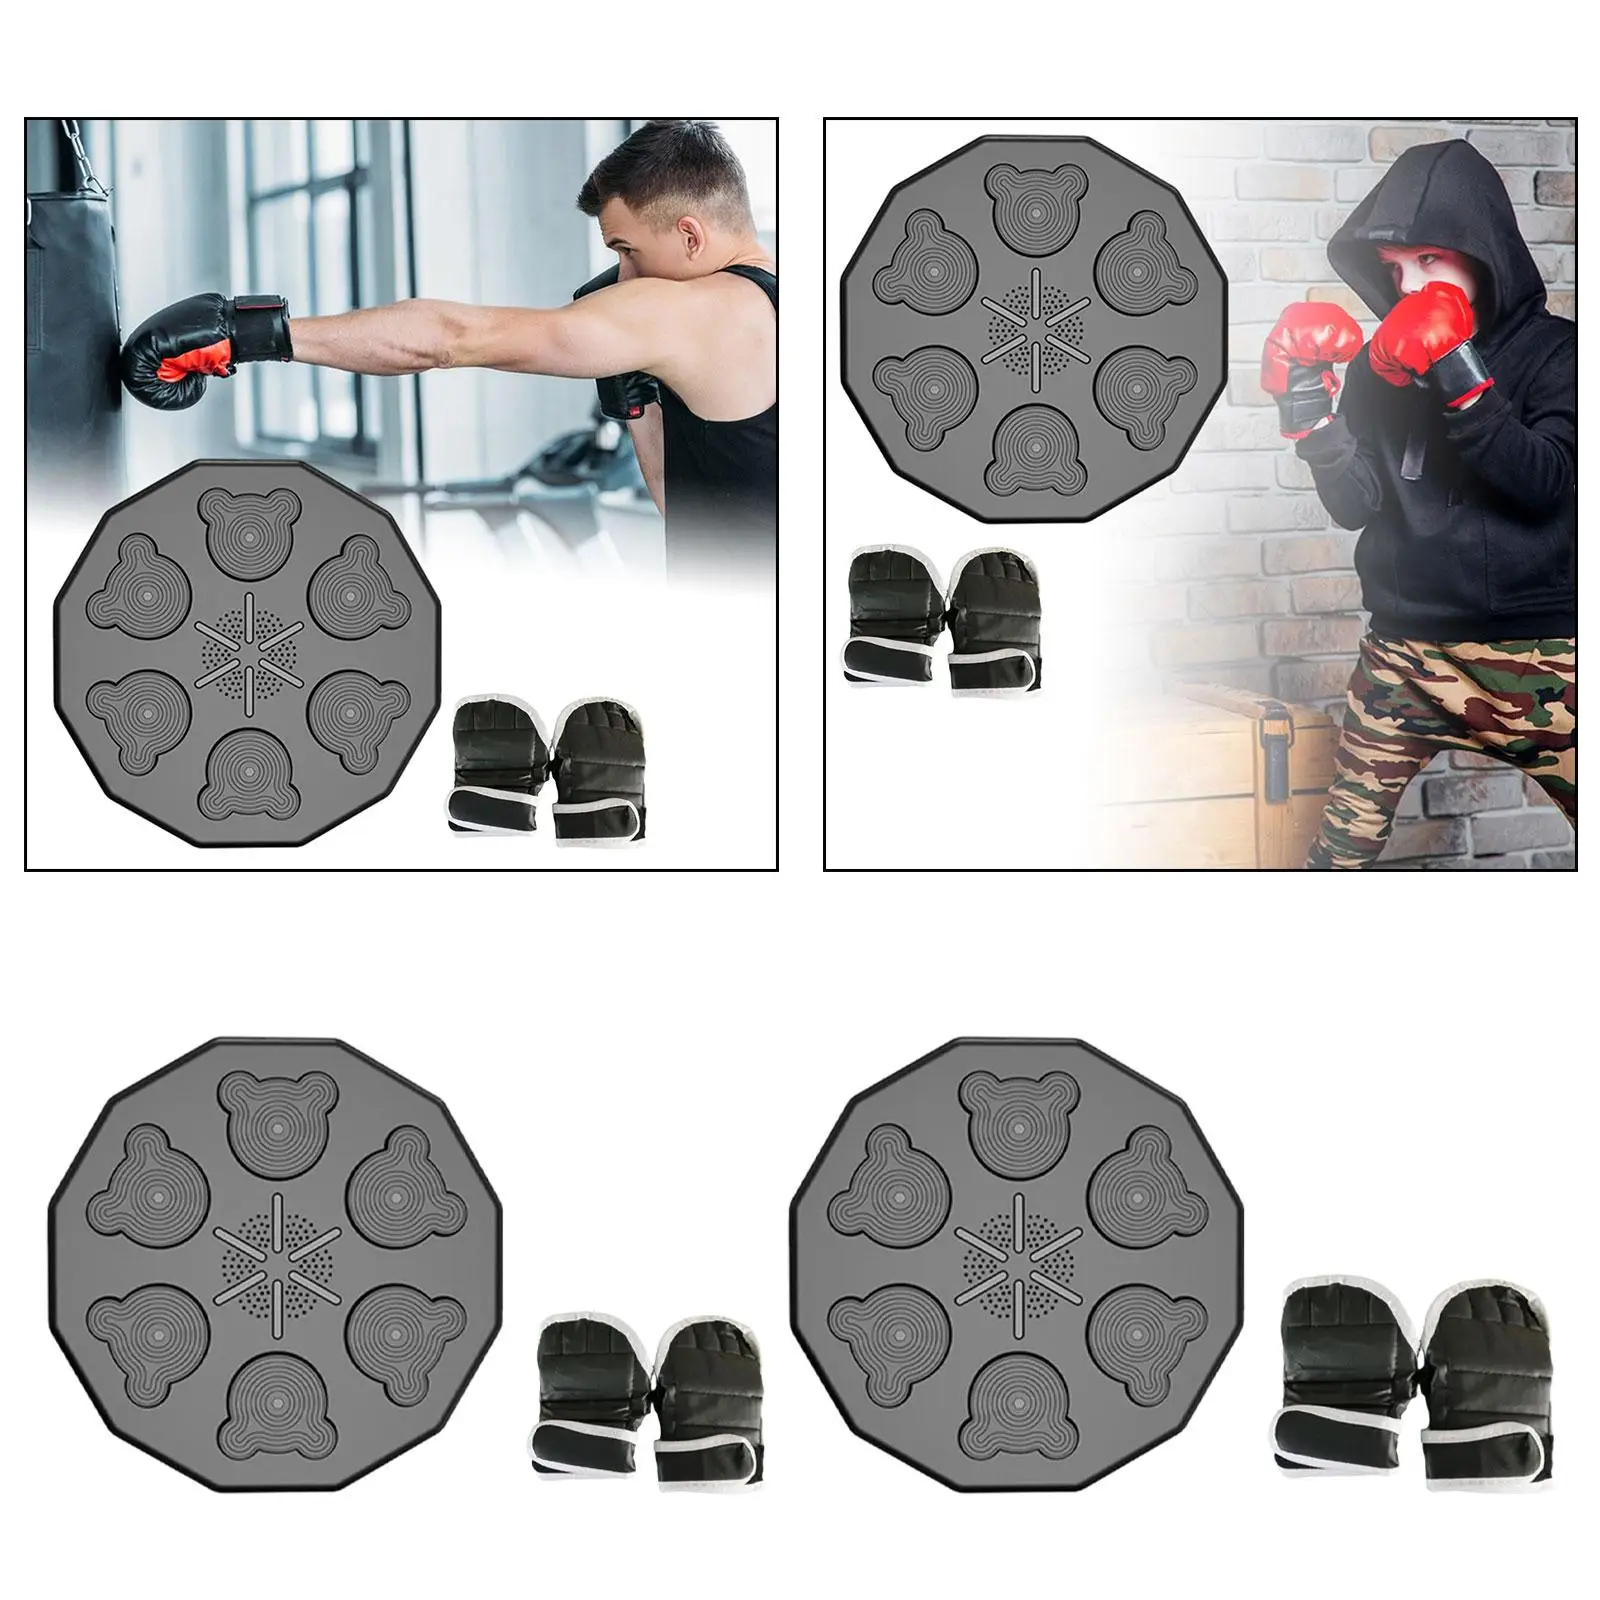 Music Boxing Machine Wall Mounted Music Boxing Pads Reaction Training Target Boxing Trainer Wall Target for Sanda Indoor Sports